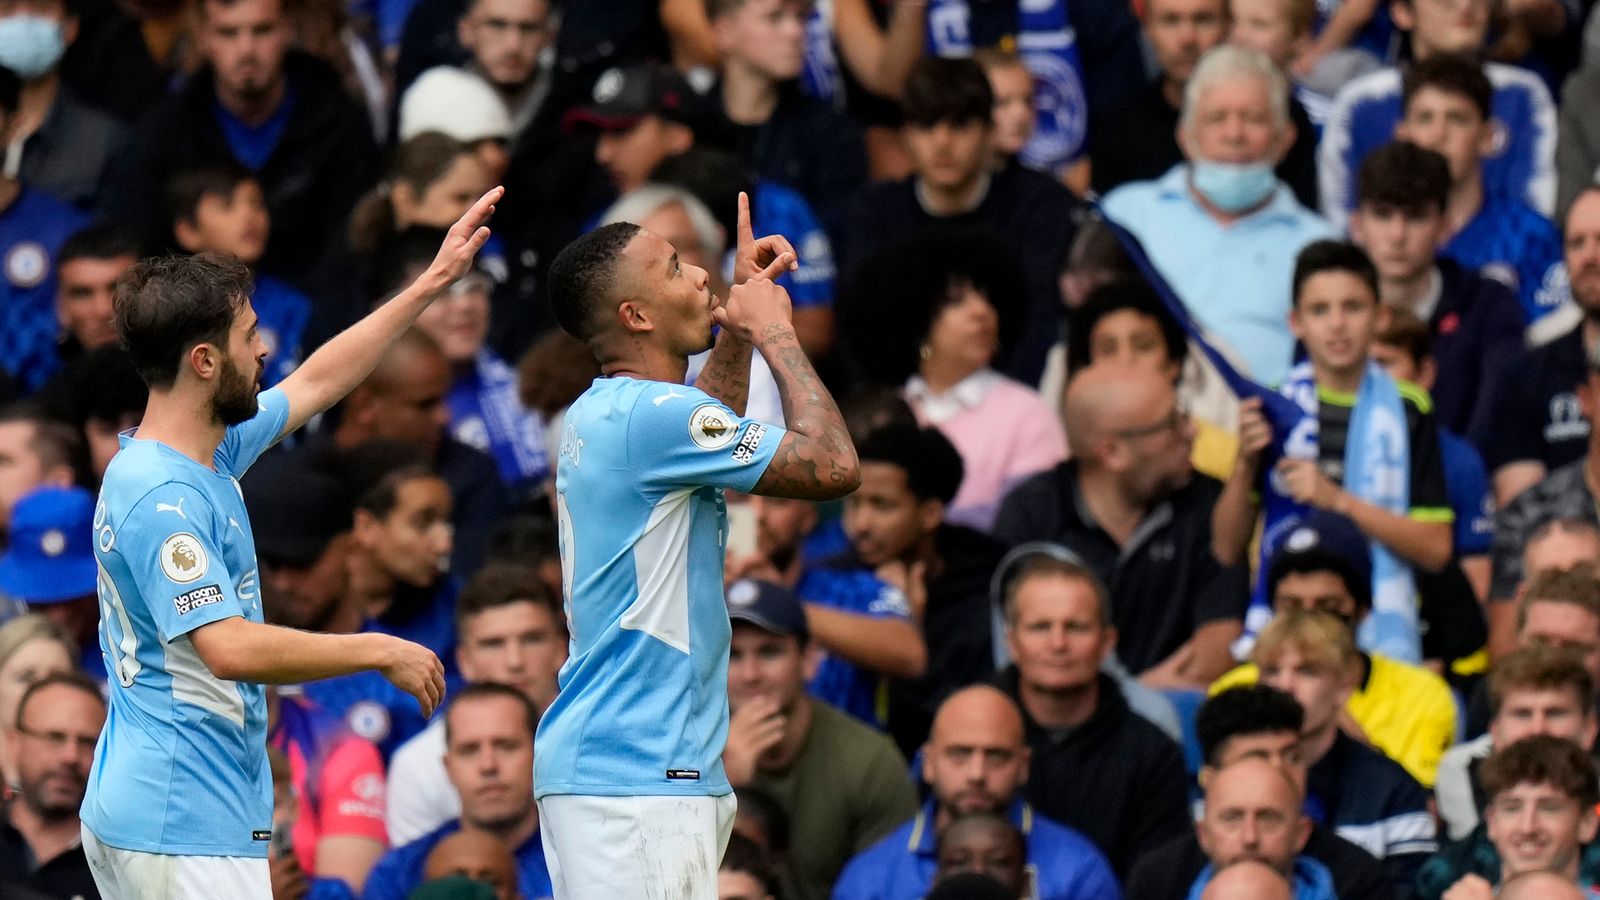 Premier League hits and misses: Man City make statement, Man Utd pay penalty